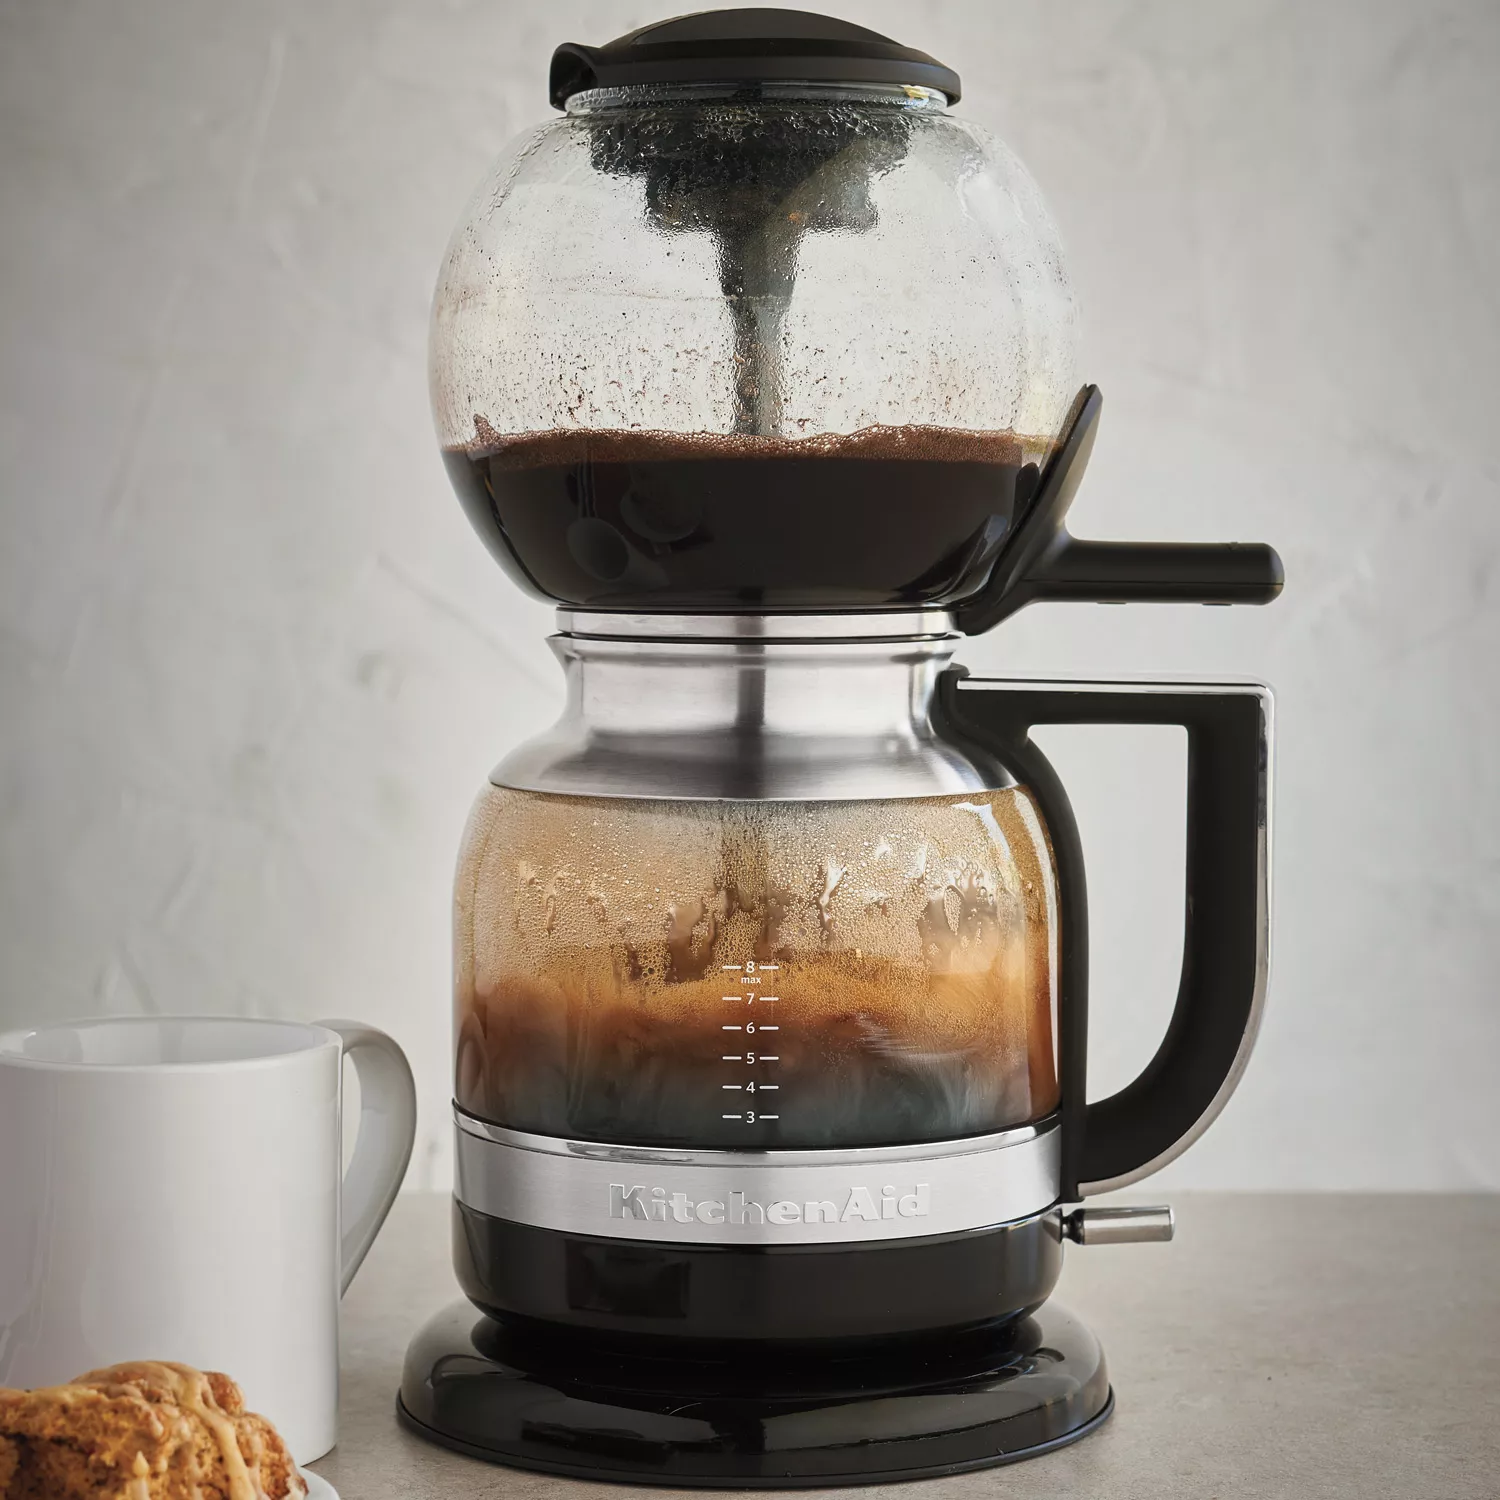 Vac to the Future: KitchenAid Unveils Automatic Siphon Coffee